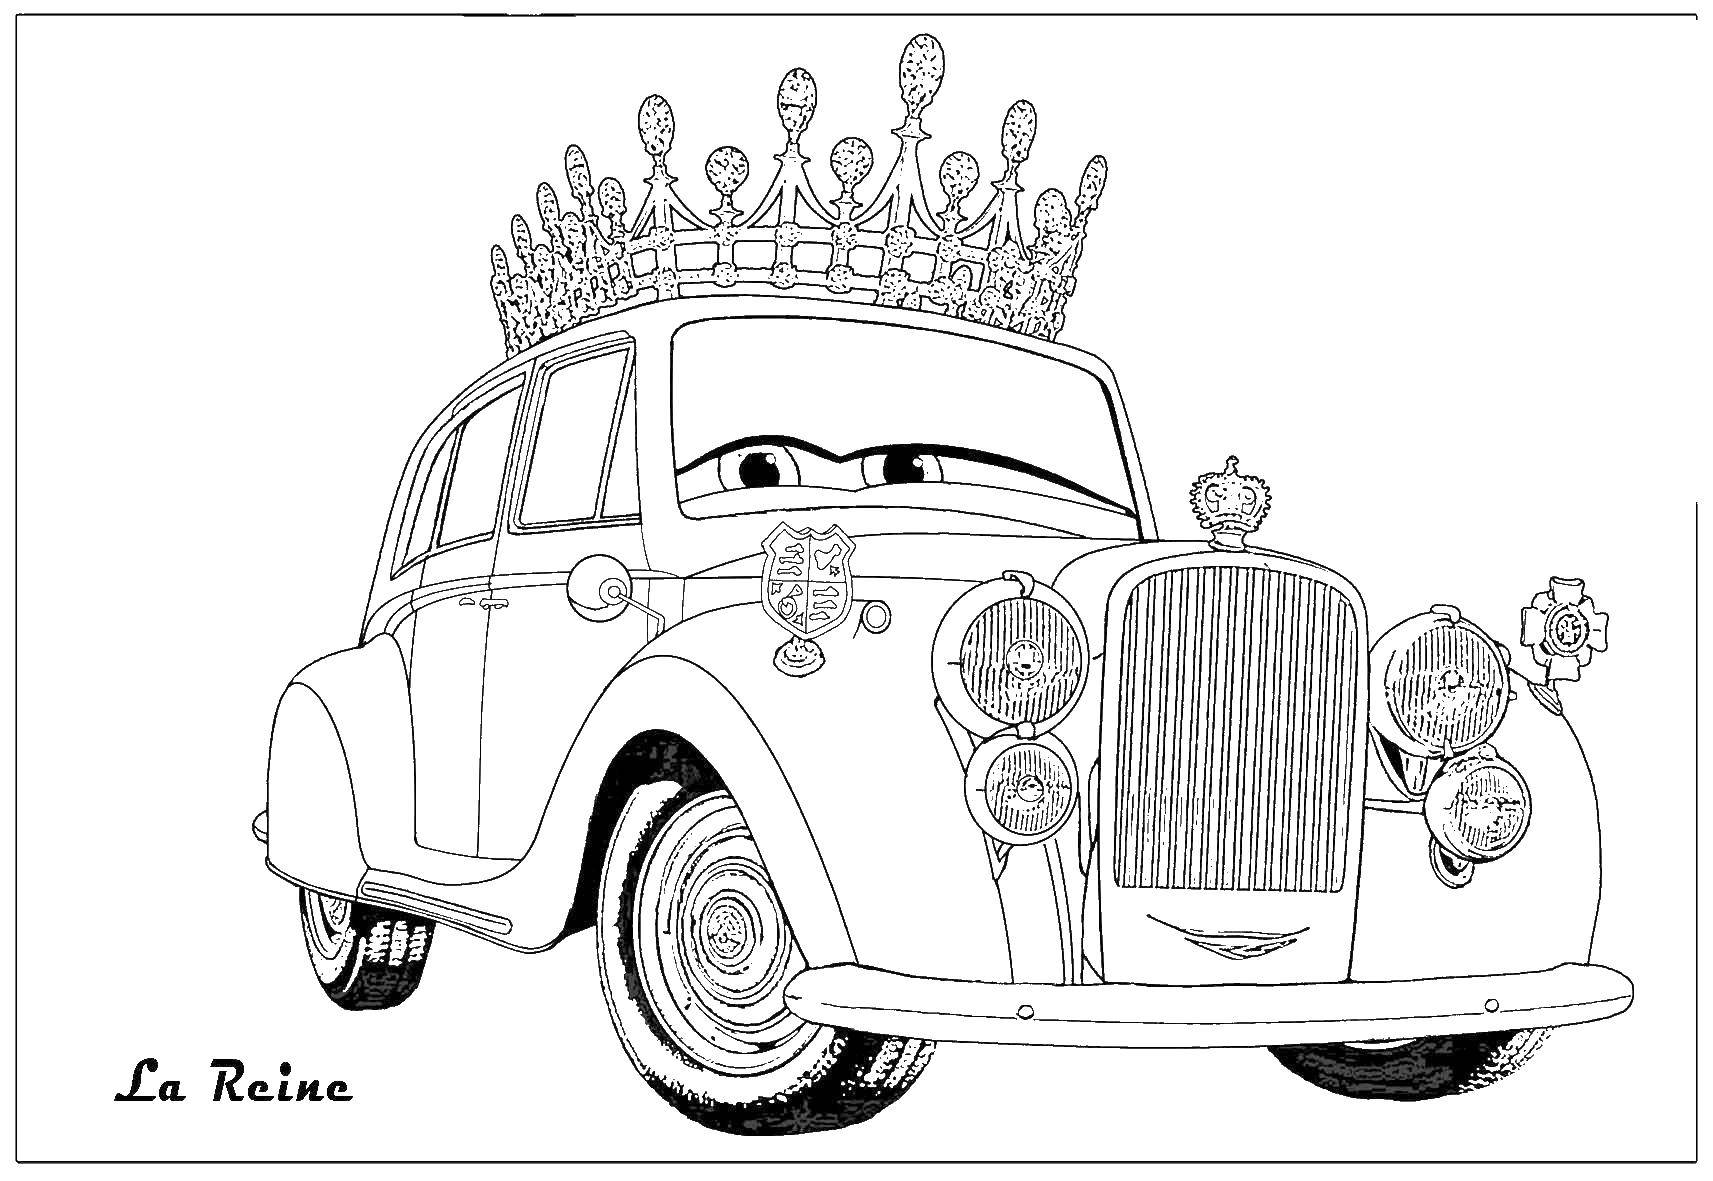 Coloring Queen of cars. Category Wheelbarrows. Tags:  Queen, the cars.